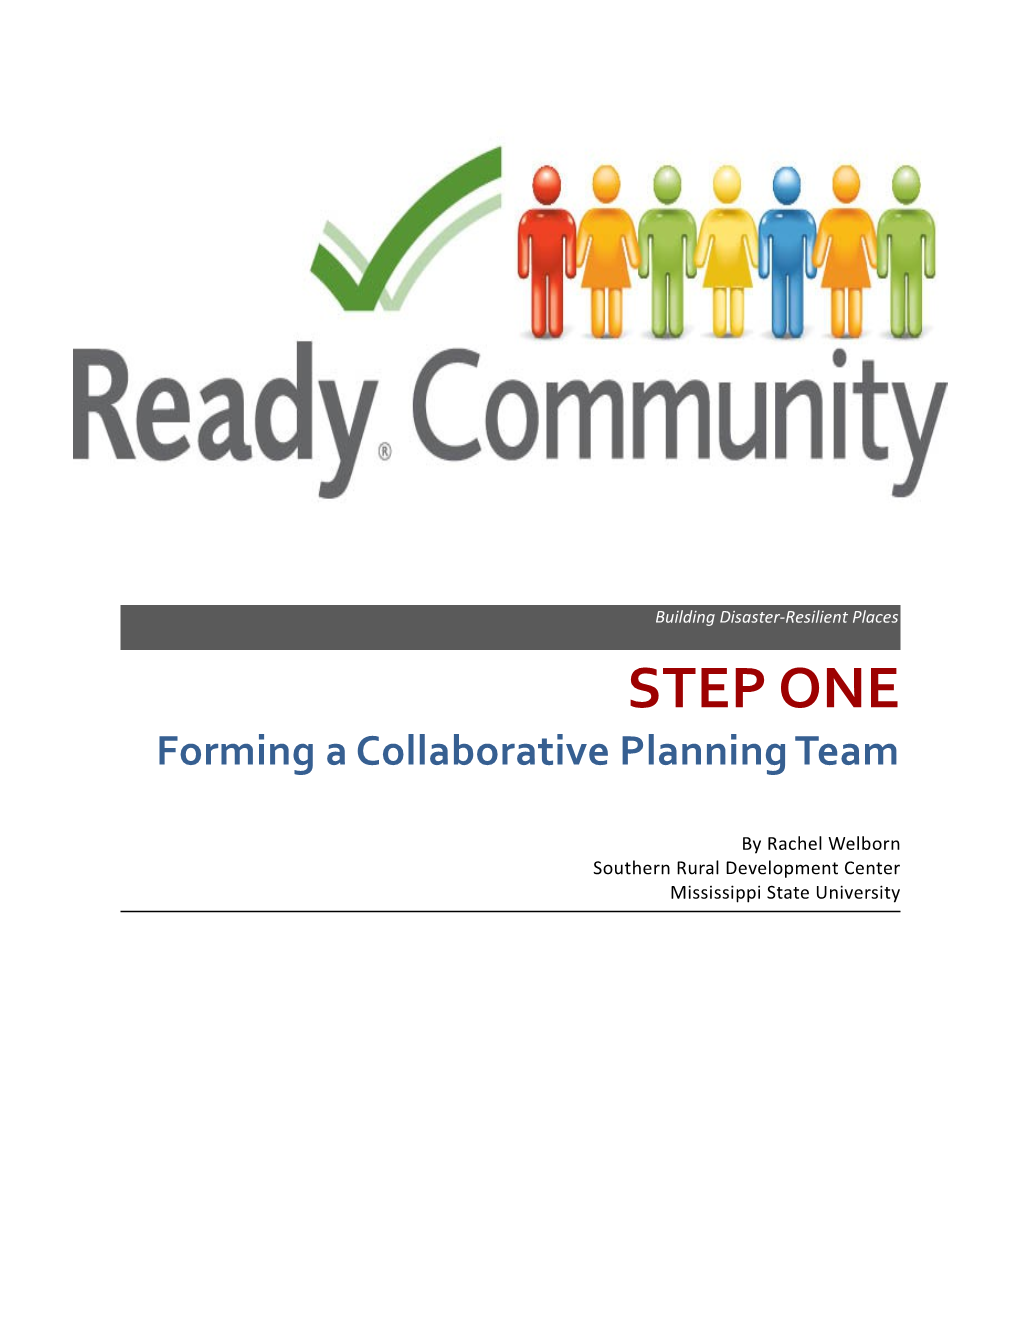 Forming a Collaborative Planning Team